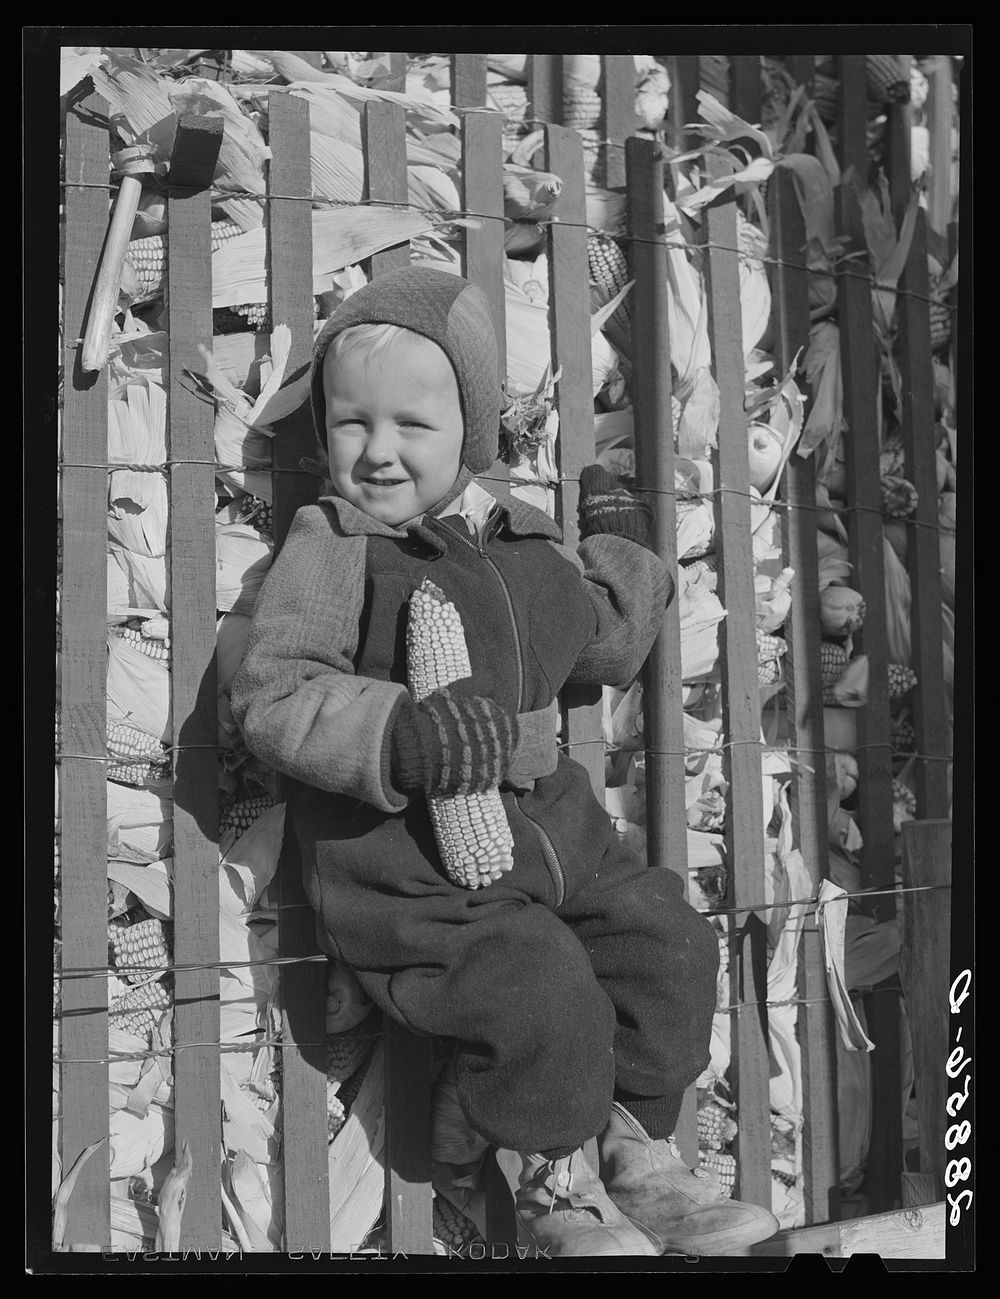 Farmer's son. Grundy County, Iowa. Sourced from the Library of Congress.